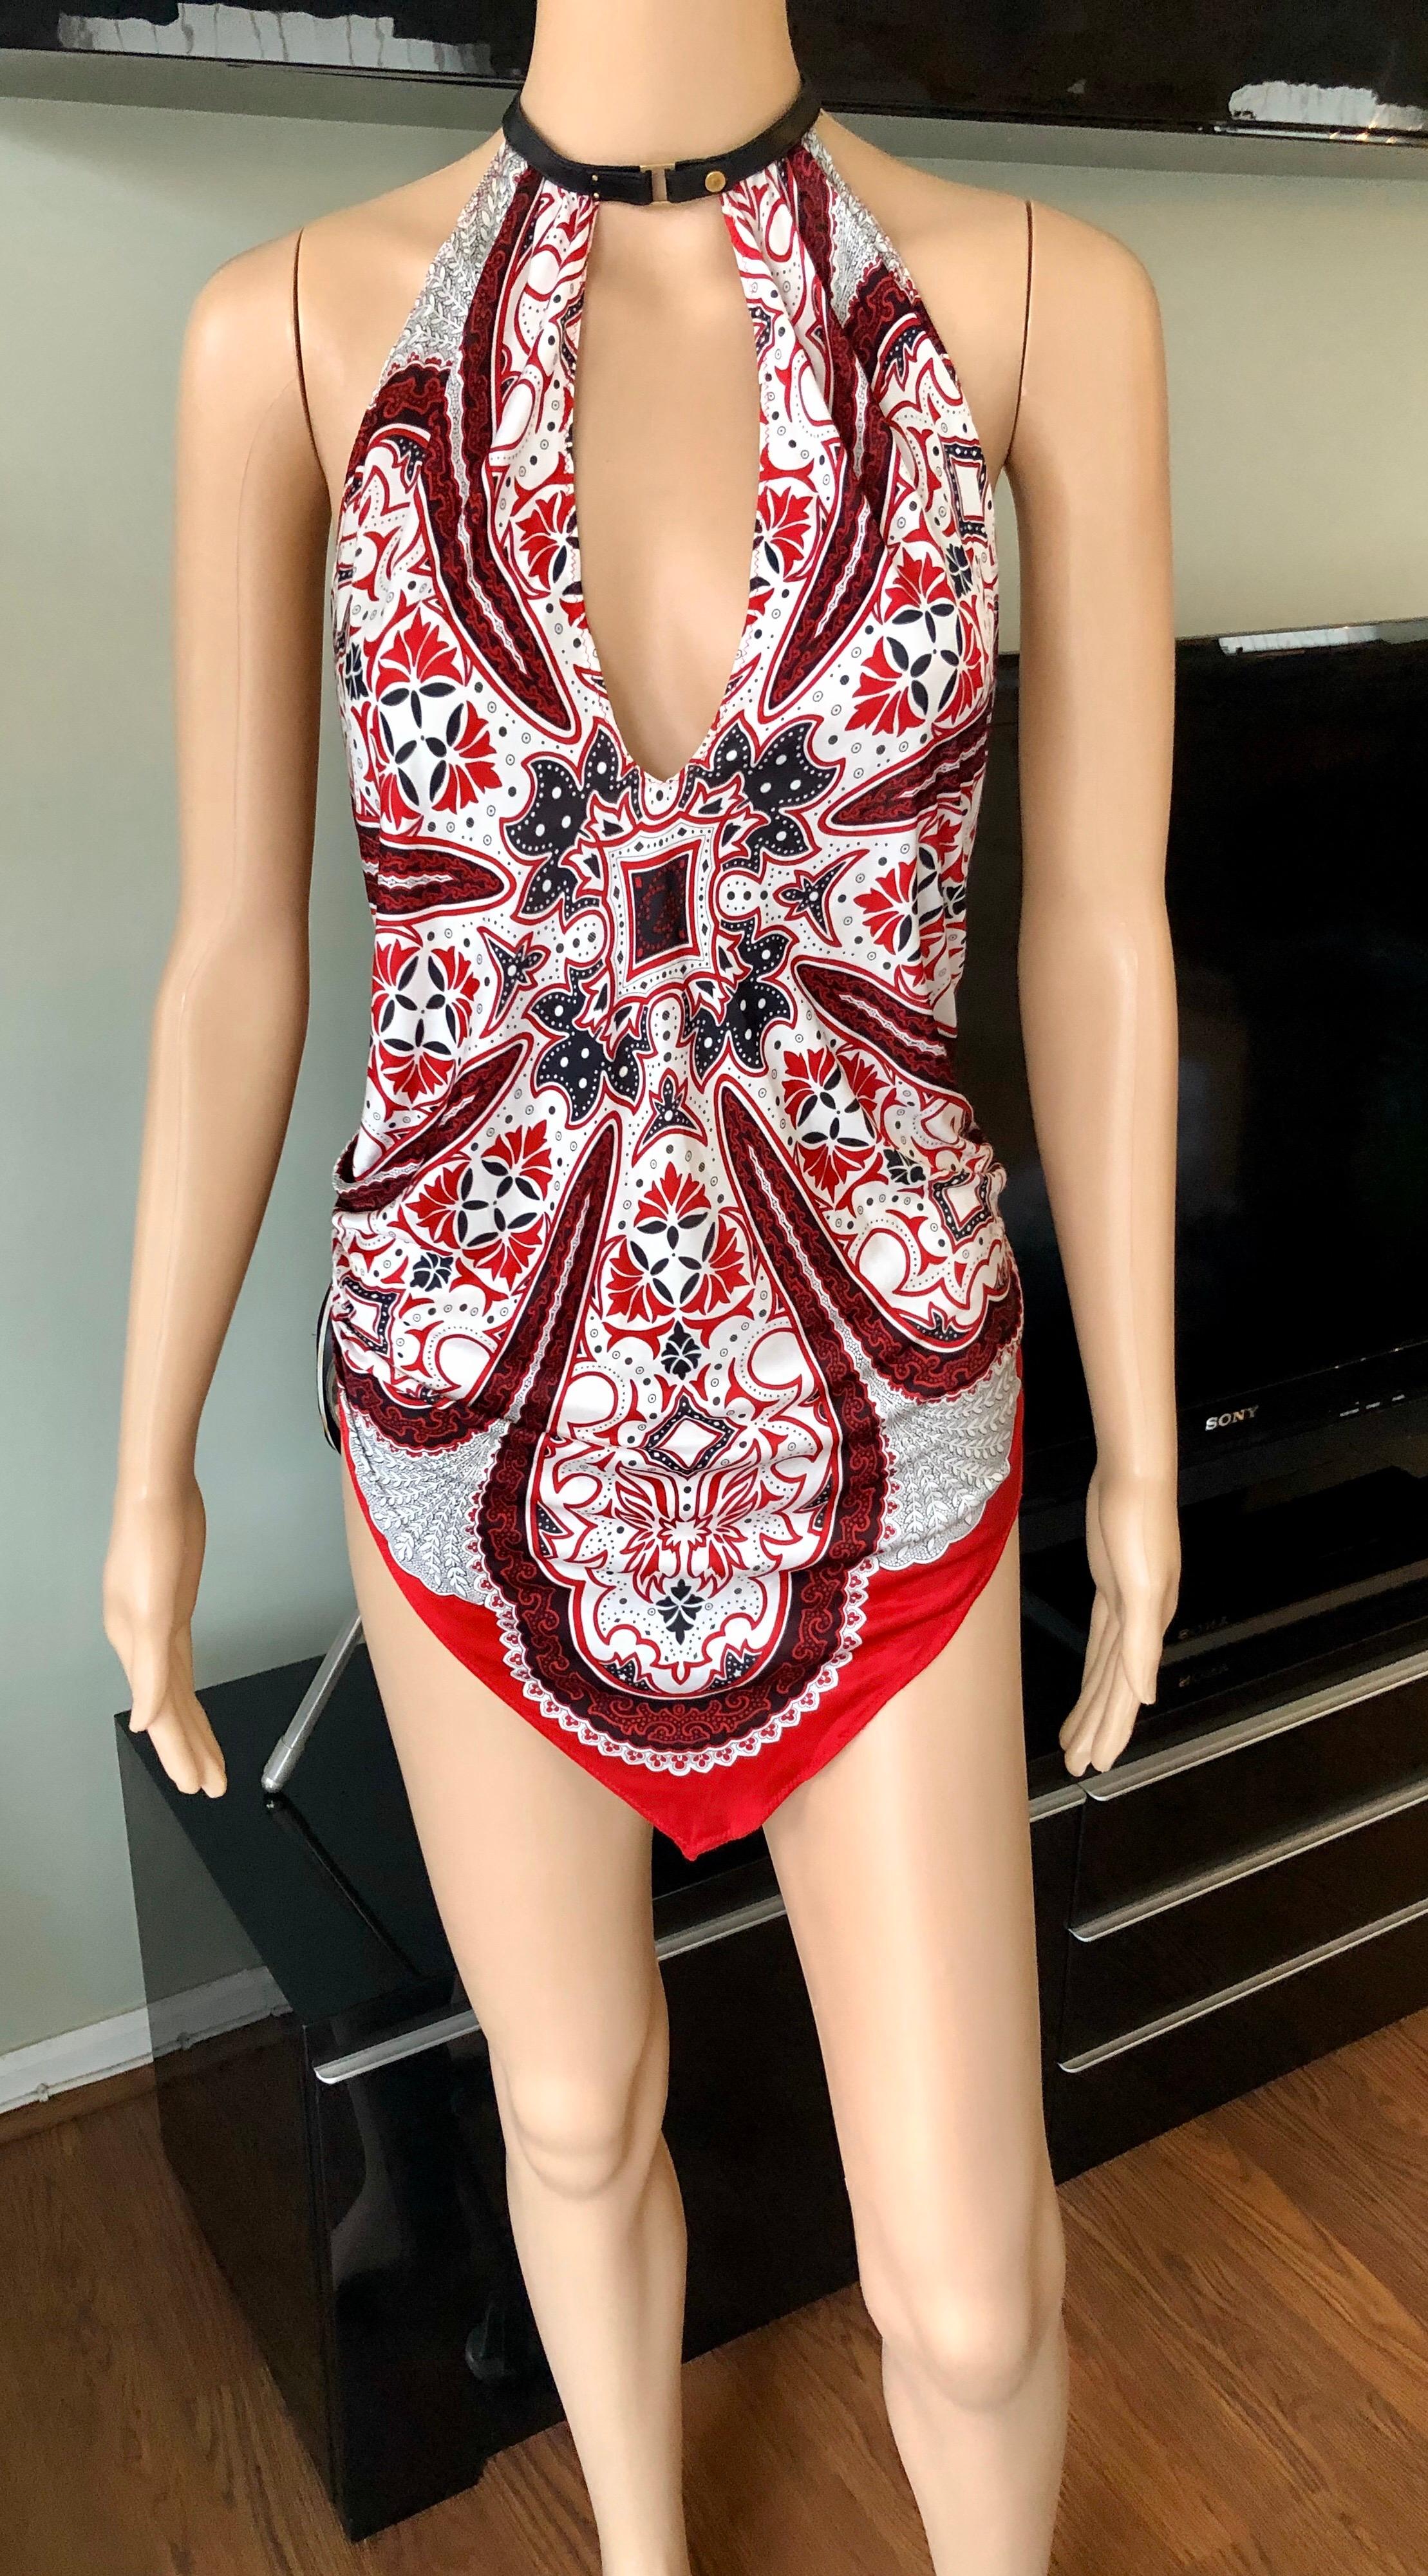 Tom Ford for Gucci Cruise 2004 Halter Leather Trim Backless Top In Excellent Condition For Sale In Naples, FL